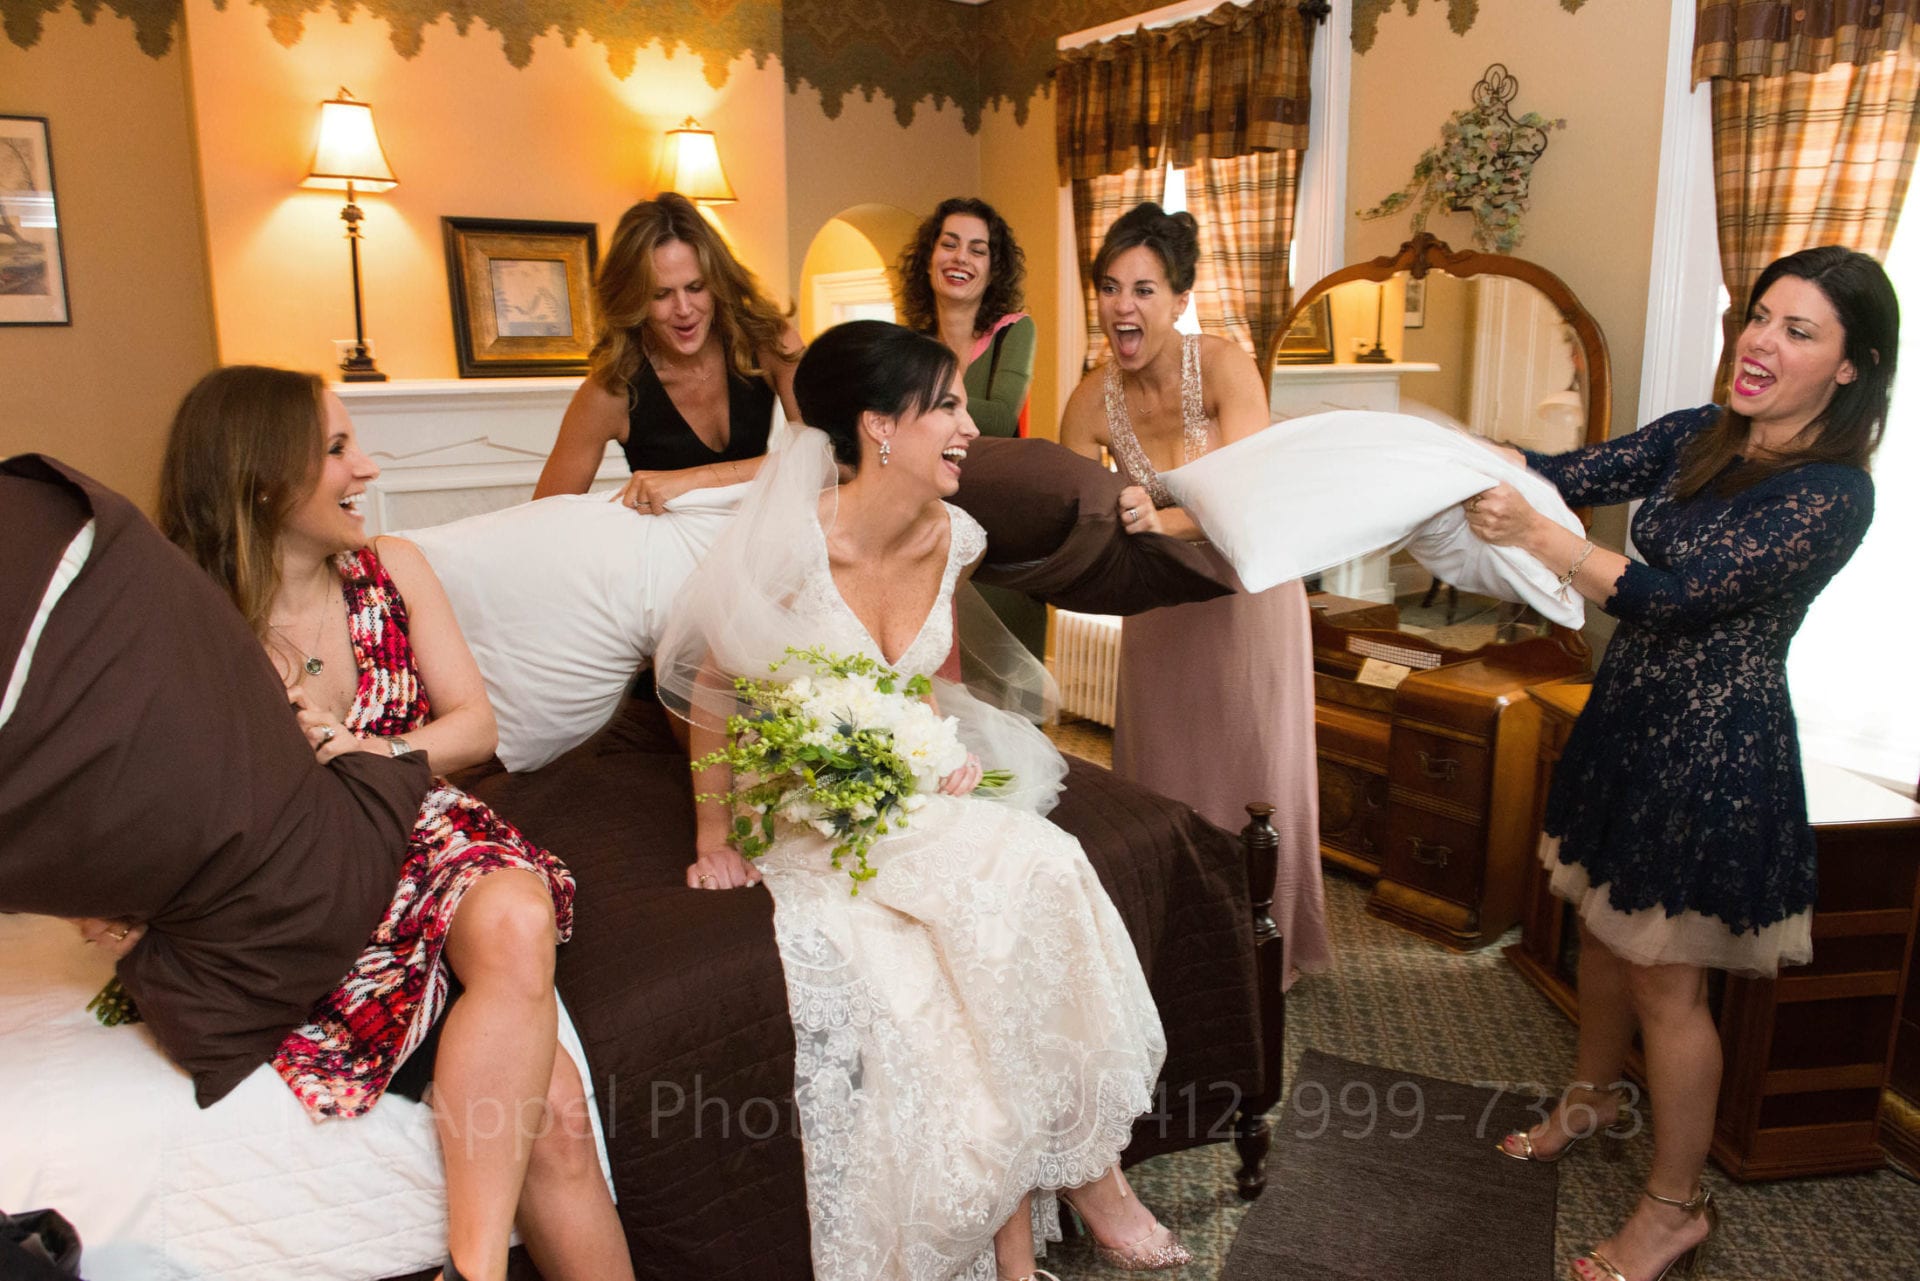 a group of laughing women surround a bride while having a pillow fight in a bedroom. Wedding Photography In West Virginia.